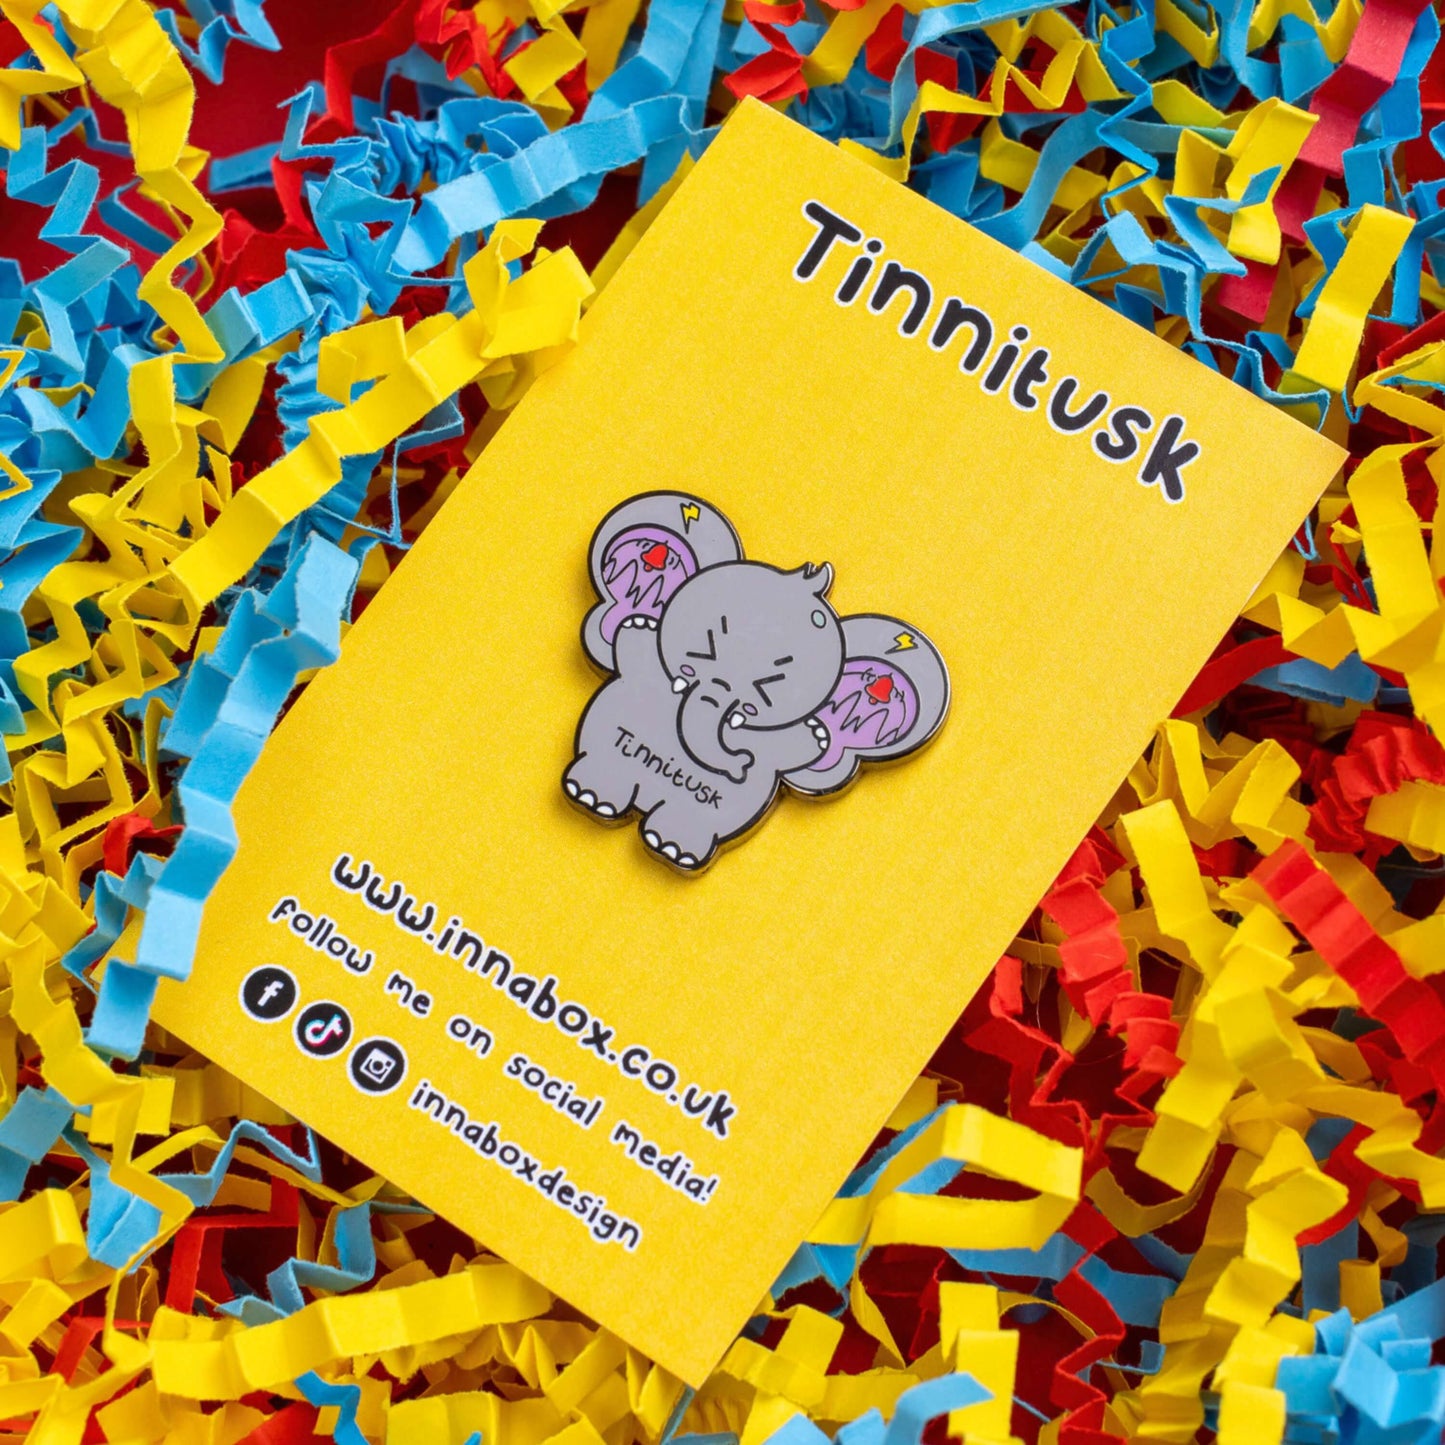 Tinnitus Enamel Pin on yellow backing card on a blue, yellow and red card confetti. A grey elephant shaped enamel pin with big ears with purple on the inside of them and black squiggly lines with red ringing alarm bells above the lines and yellow lightening bolts above the bells. The elephant has its eyes screwed shut and its arms up. 'Tinnitusk' is written in black across its middle.